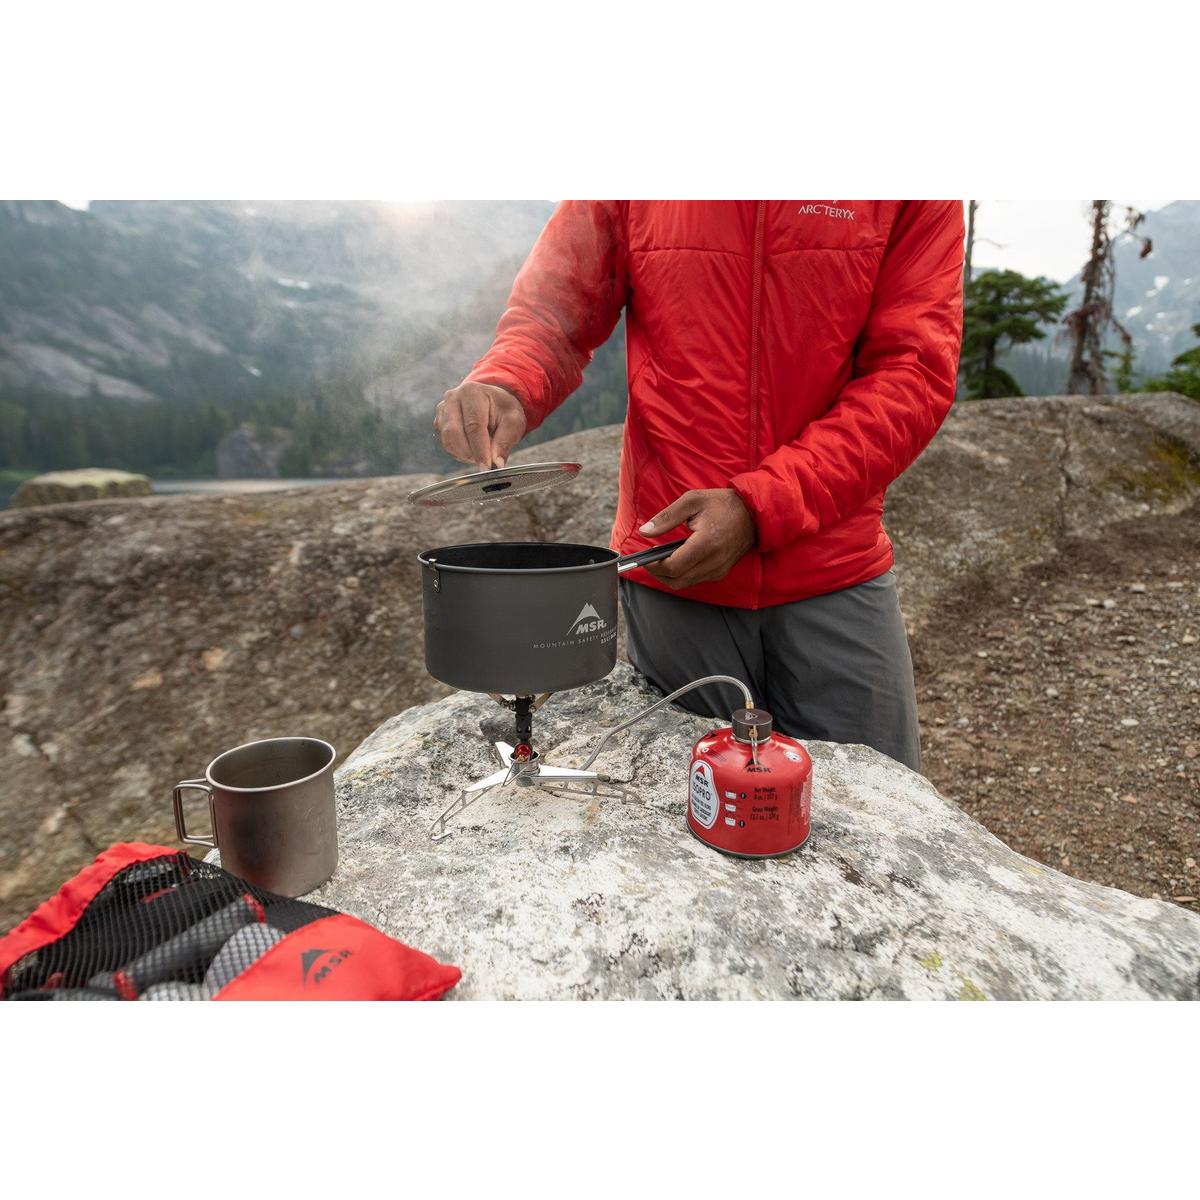 M.s.r. LowDown Remote Camping Stove Adapter